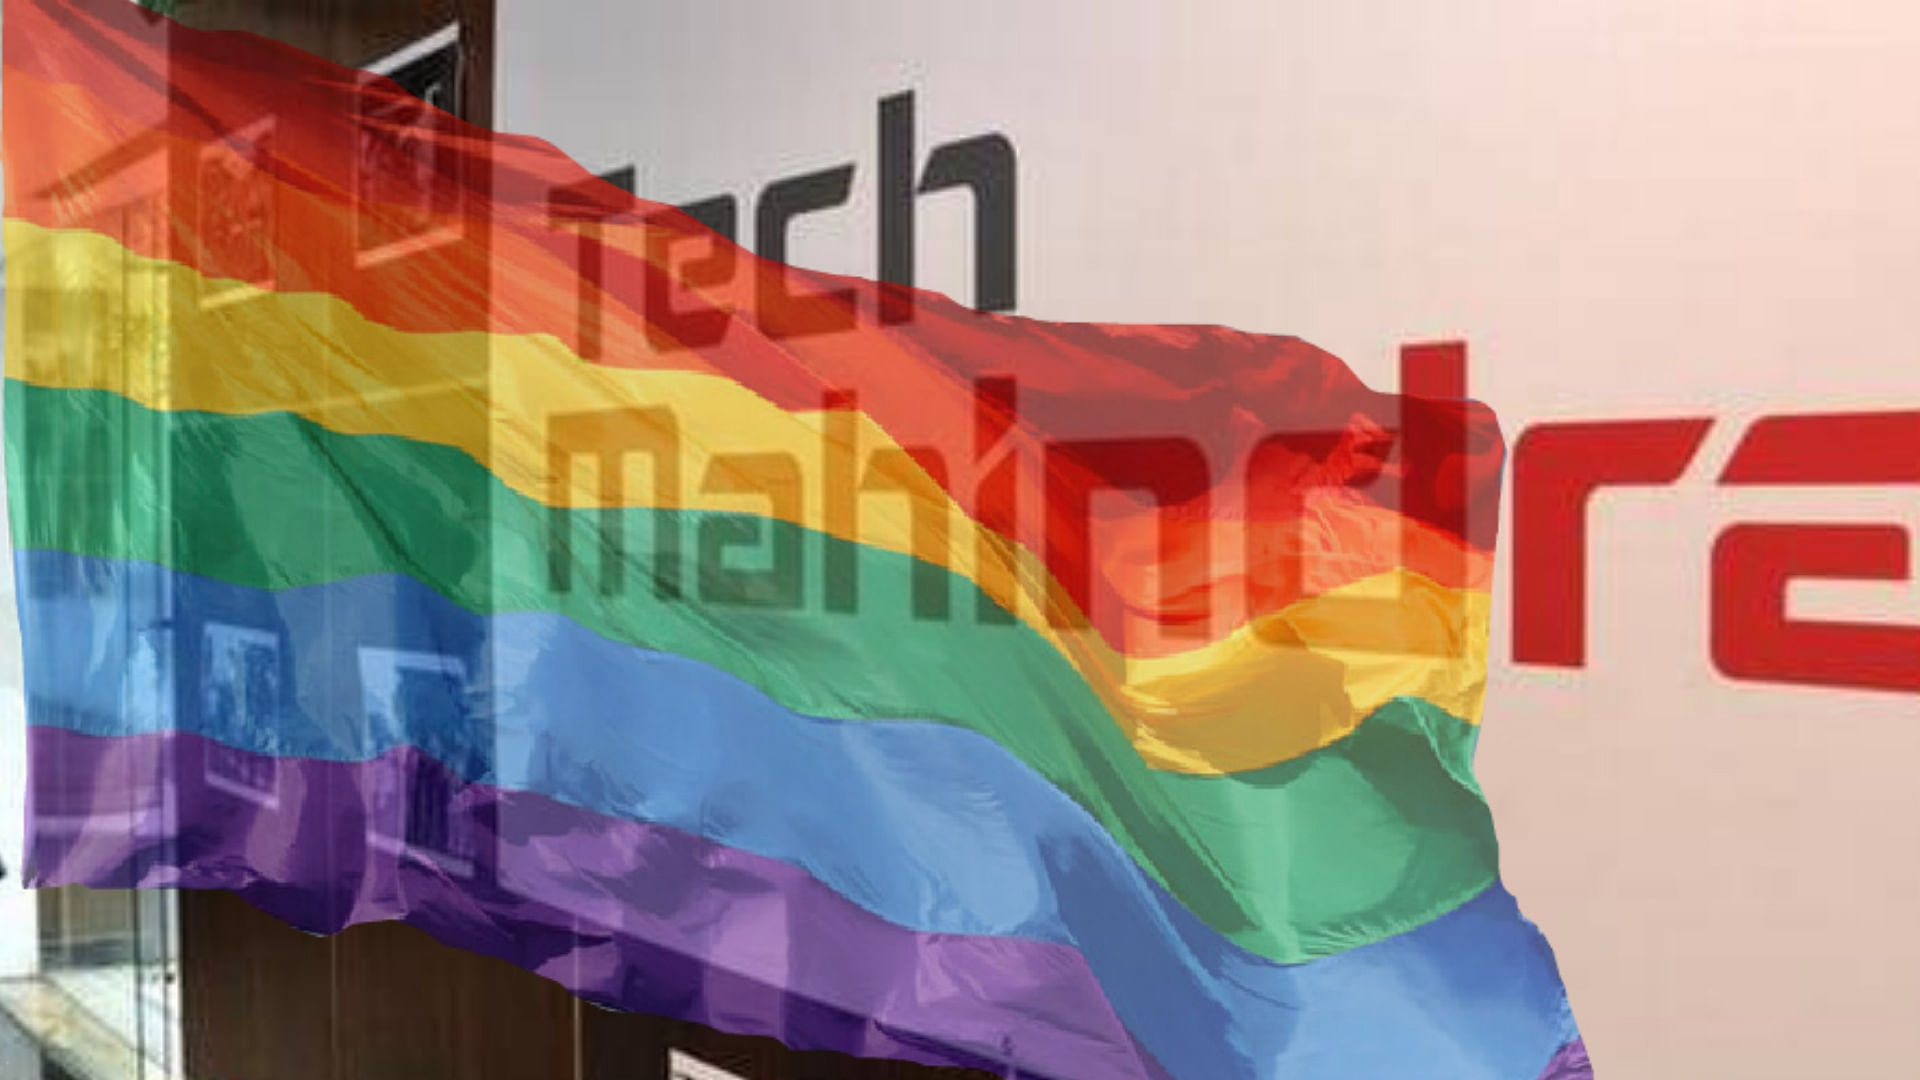 Information technology major Tech Mahindra Ltd has sacked its chief diversity and inclusivity officer accused of making homophobic and racial slurs against a former employee.